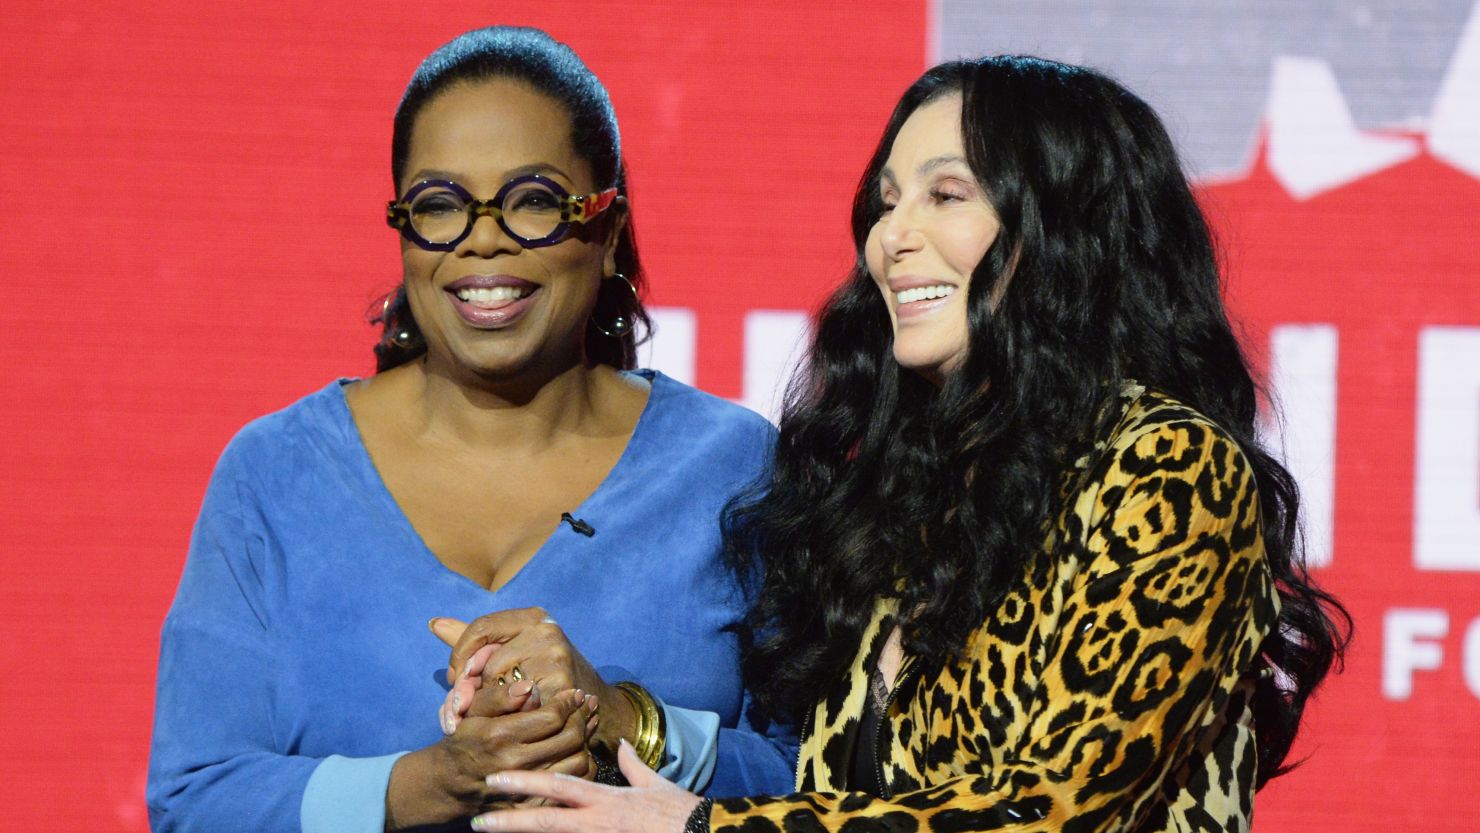 Oprah Winfrey and Cher attend 'Hand in Hand: A Benefit for Hurricane Relief.'